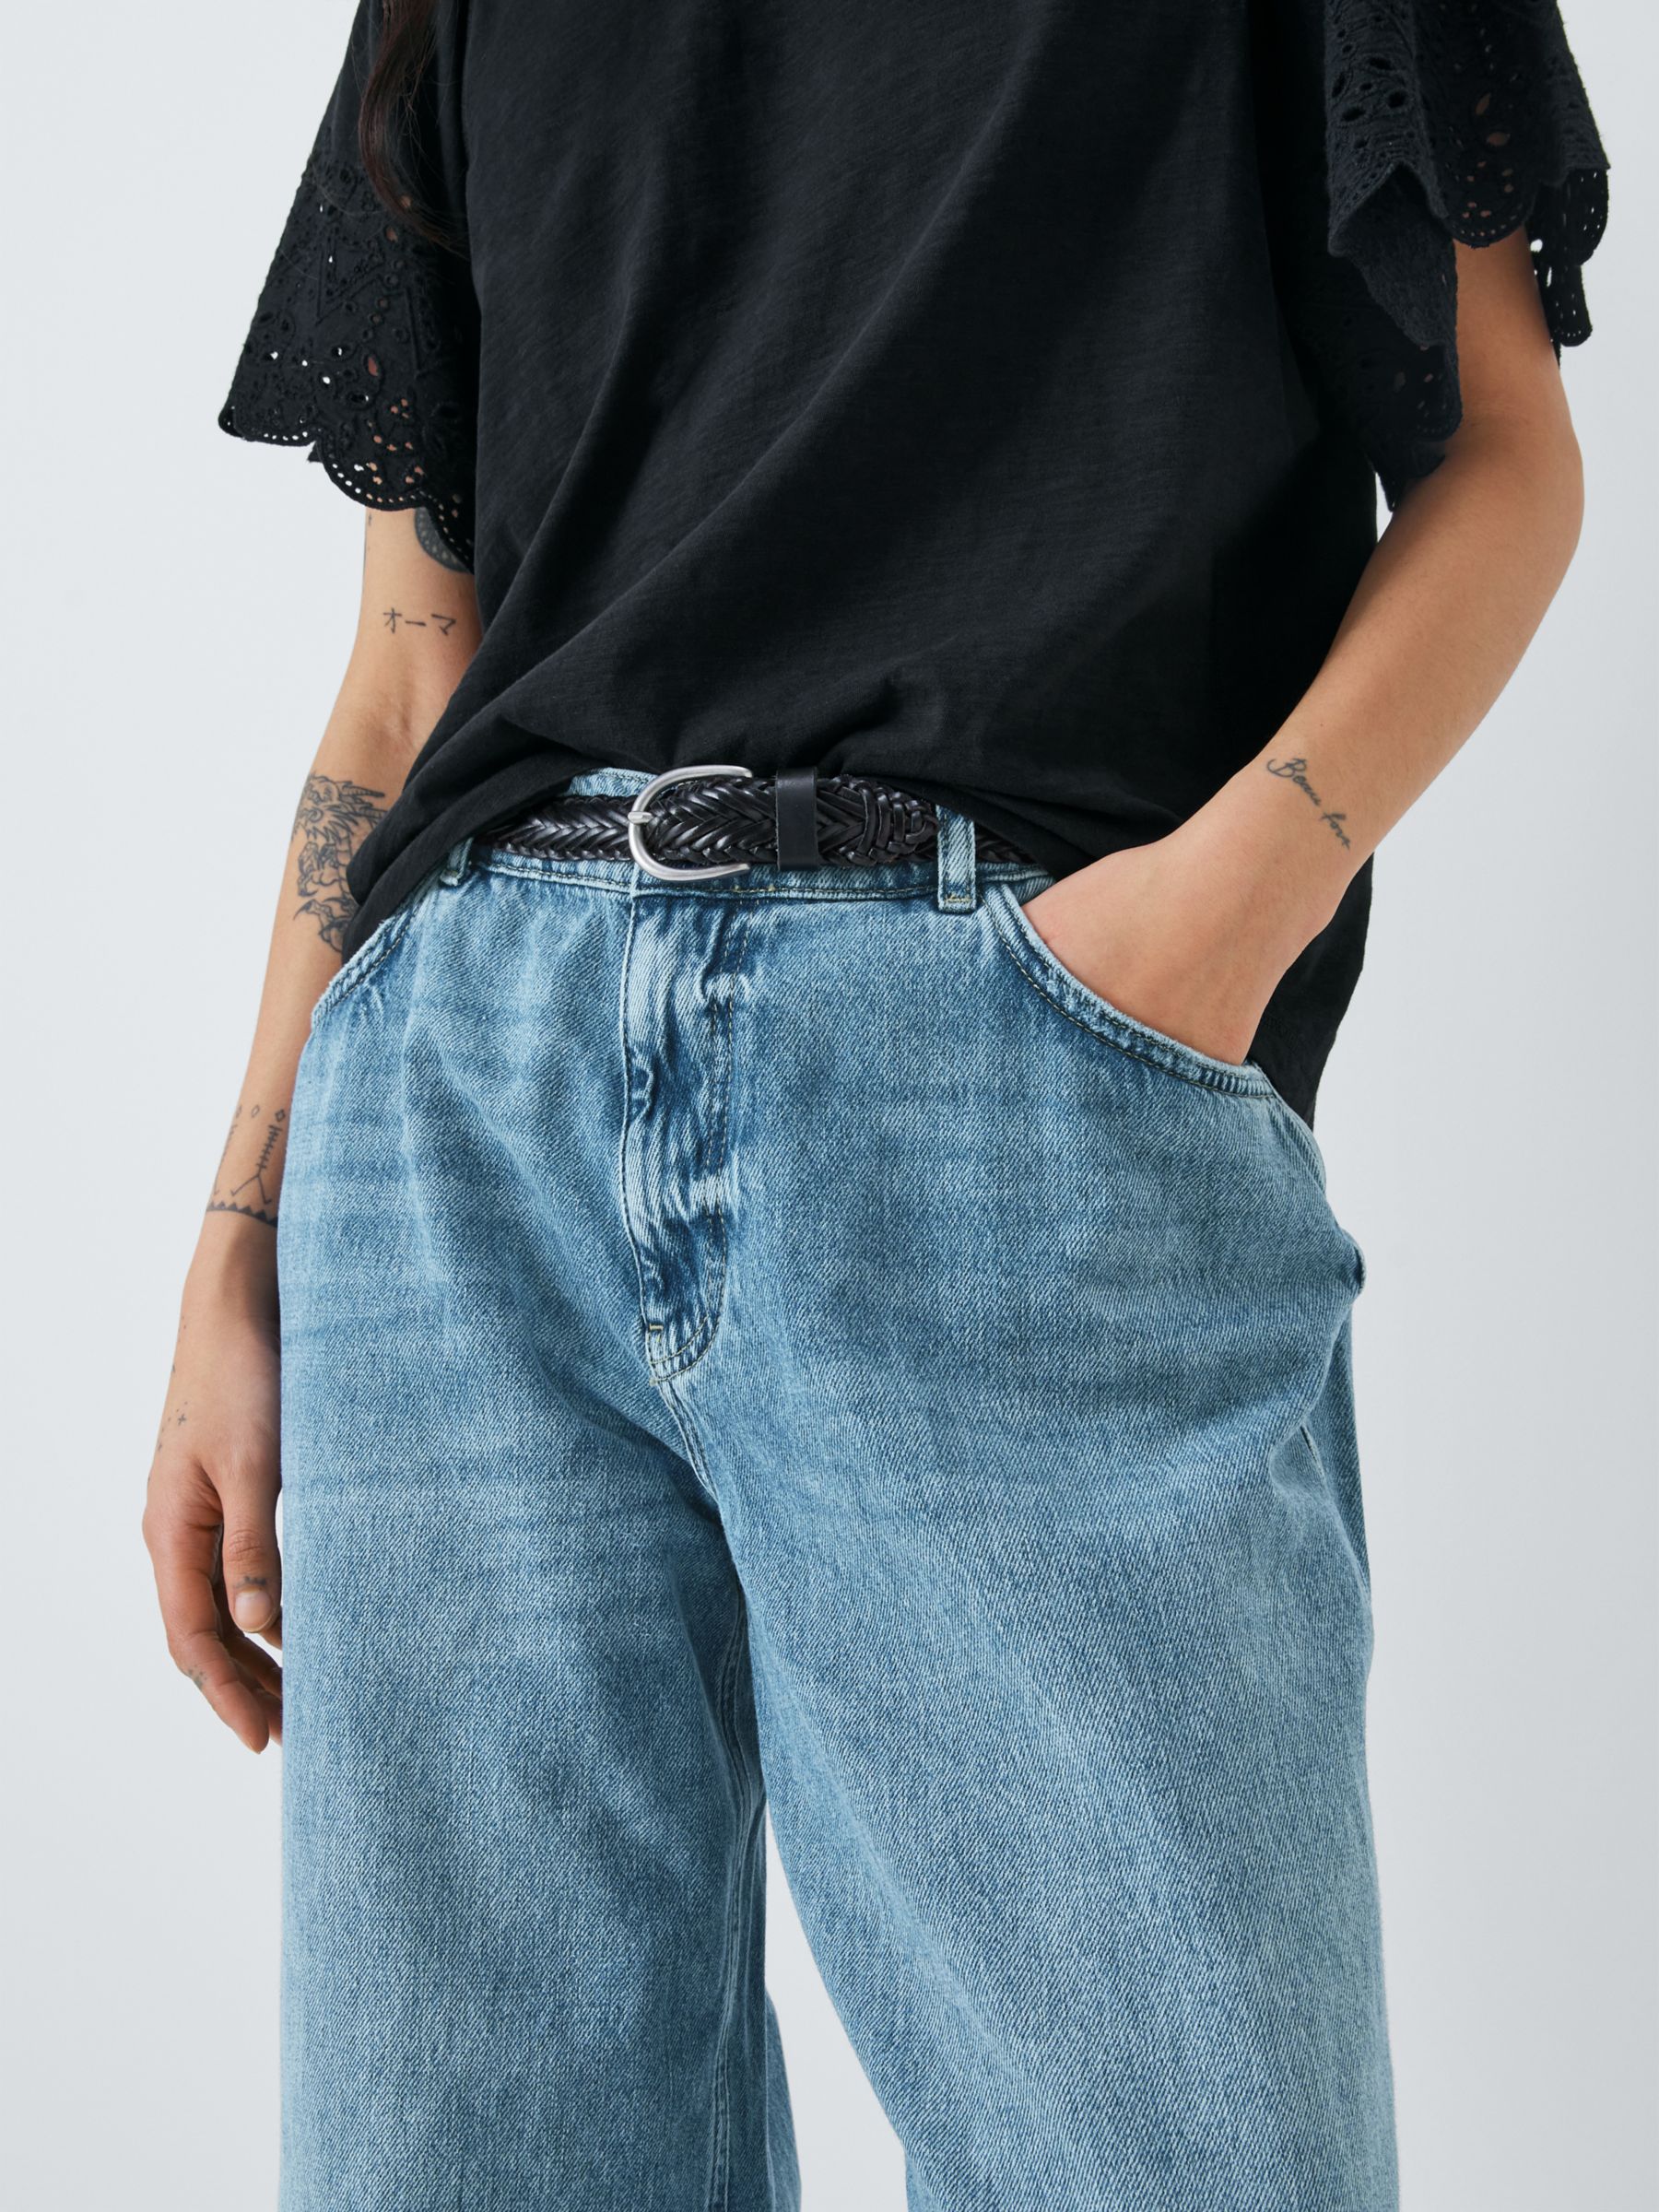 AND/OR Pasadena Puddle Jeans, Blue, 32R